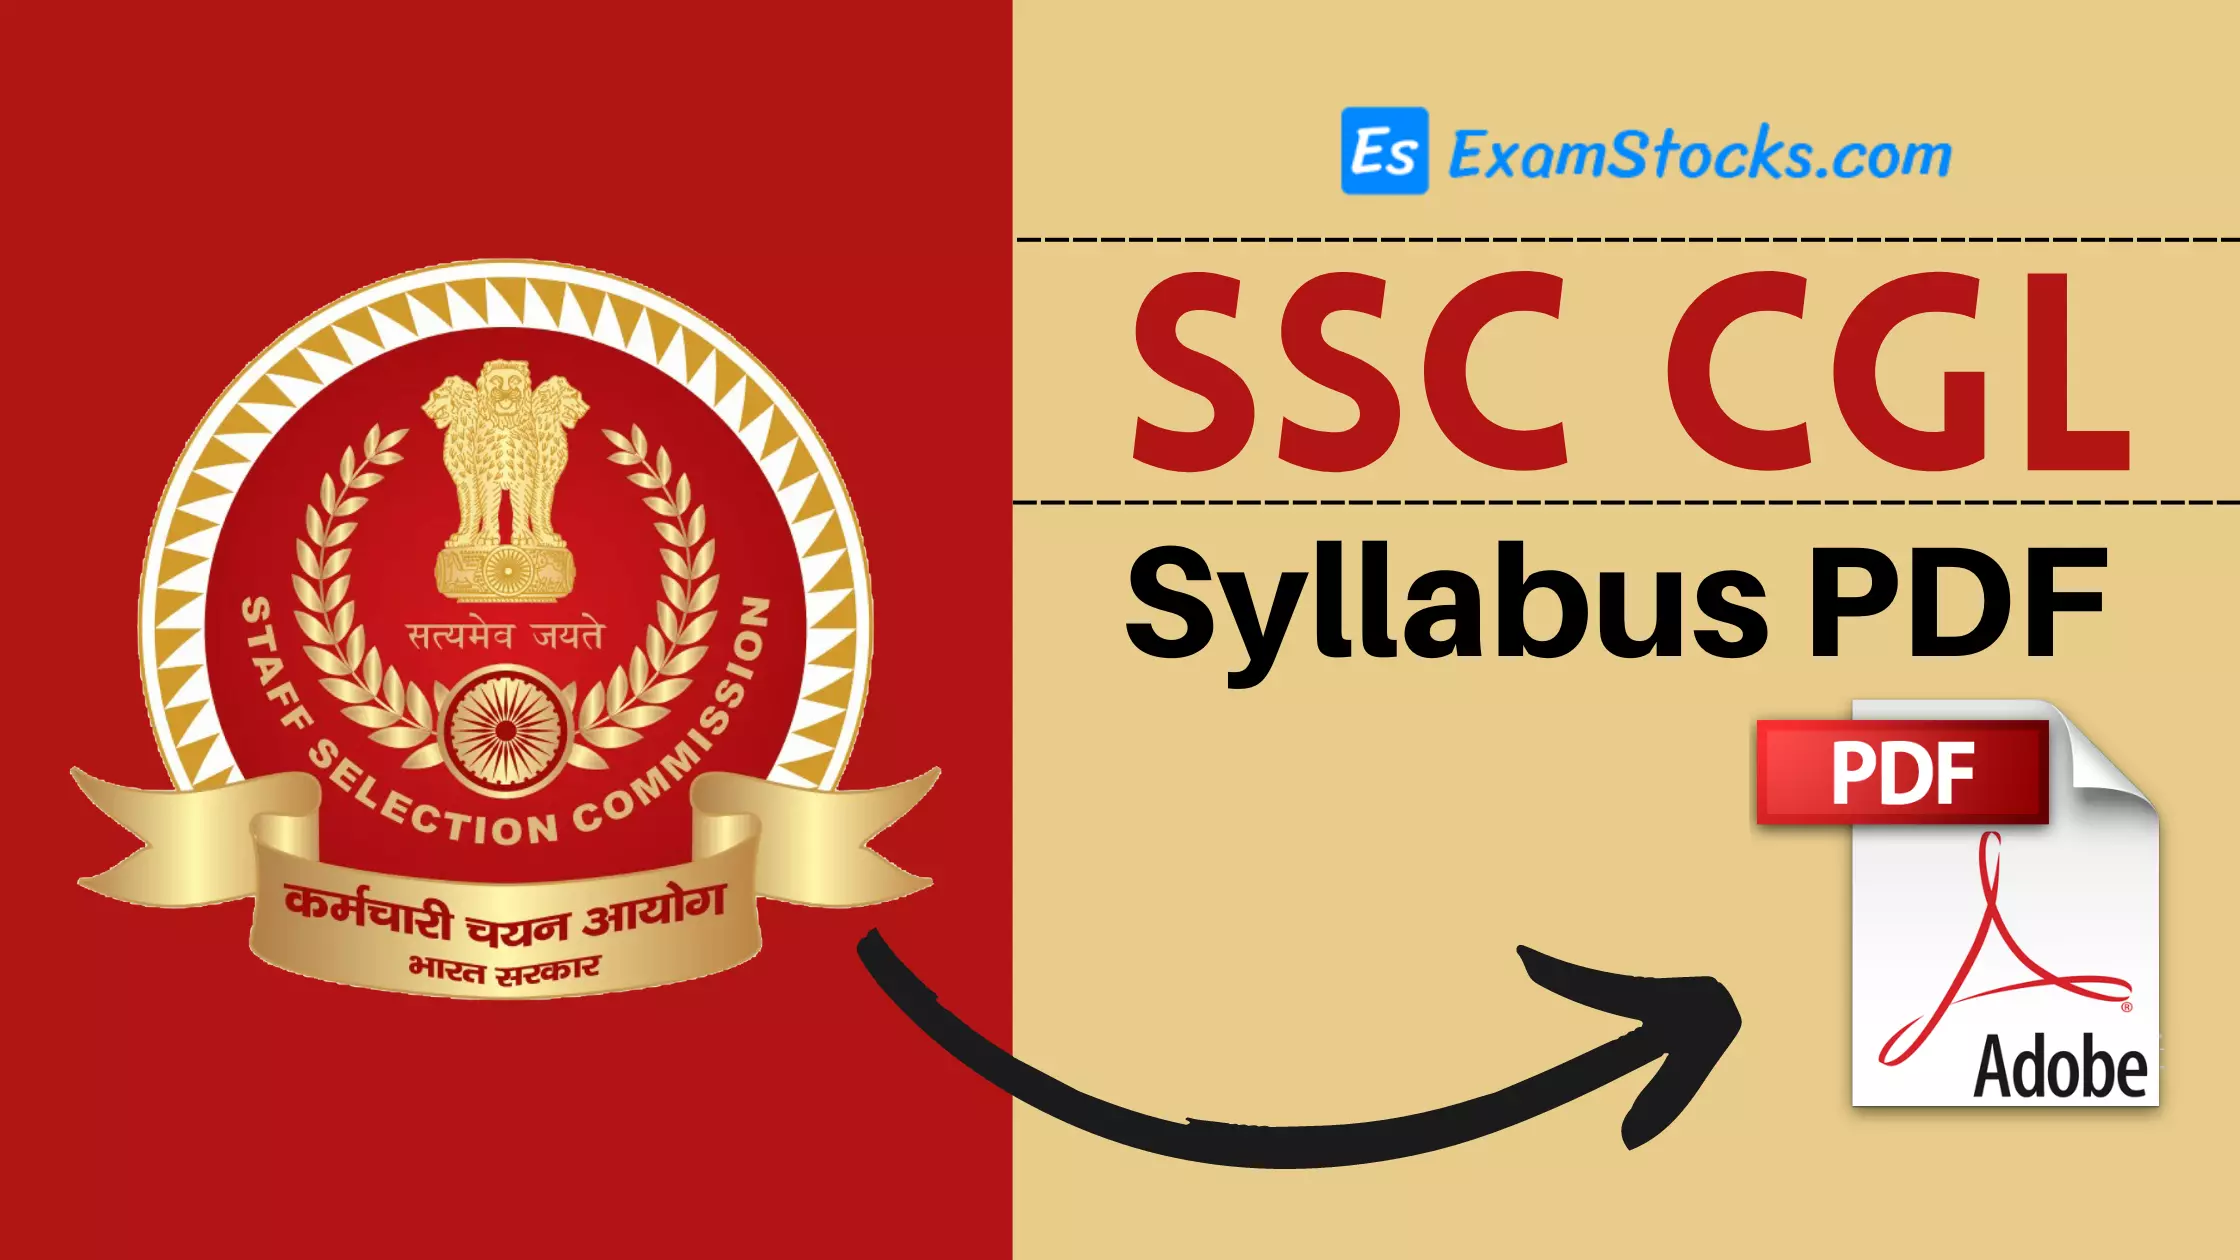 Ssc Cgl Syllabus Pdf 2022 For Tier 1 And Tier 2 Exams In Detail Exam Stocks 2953